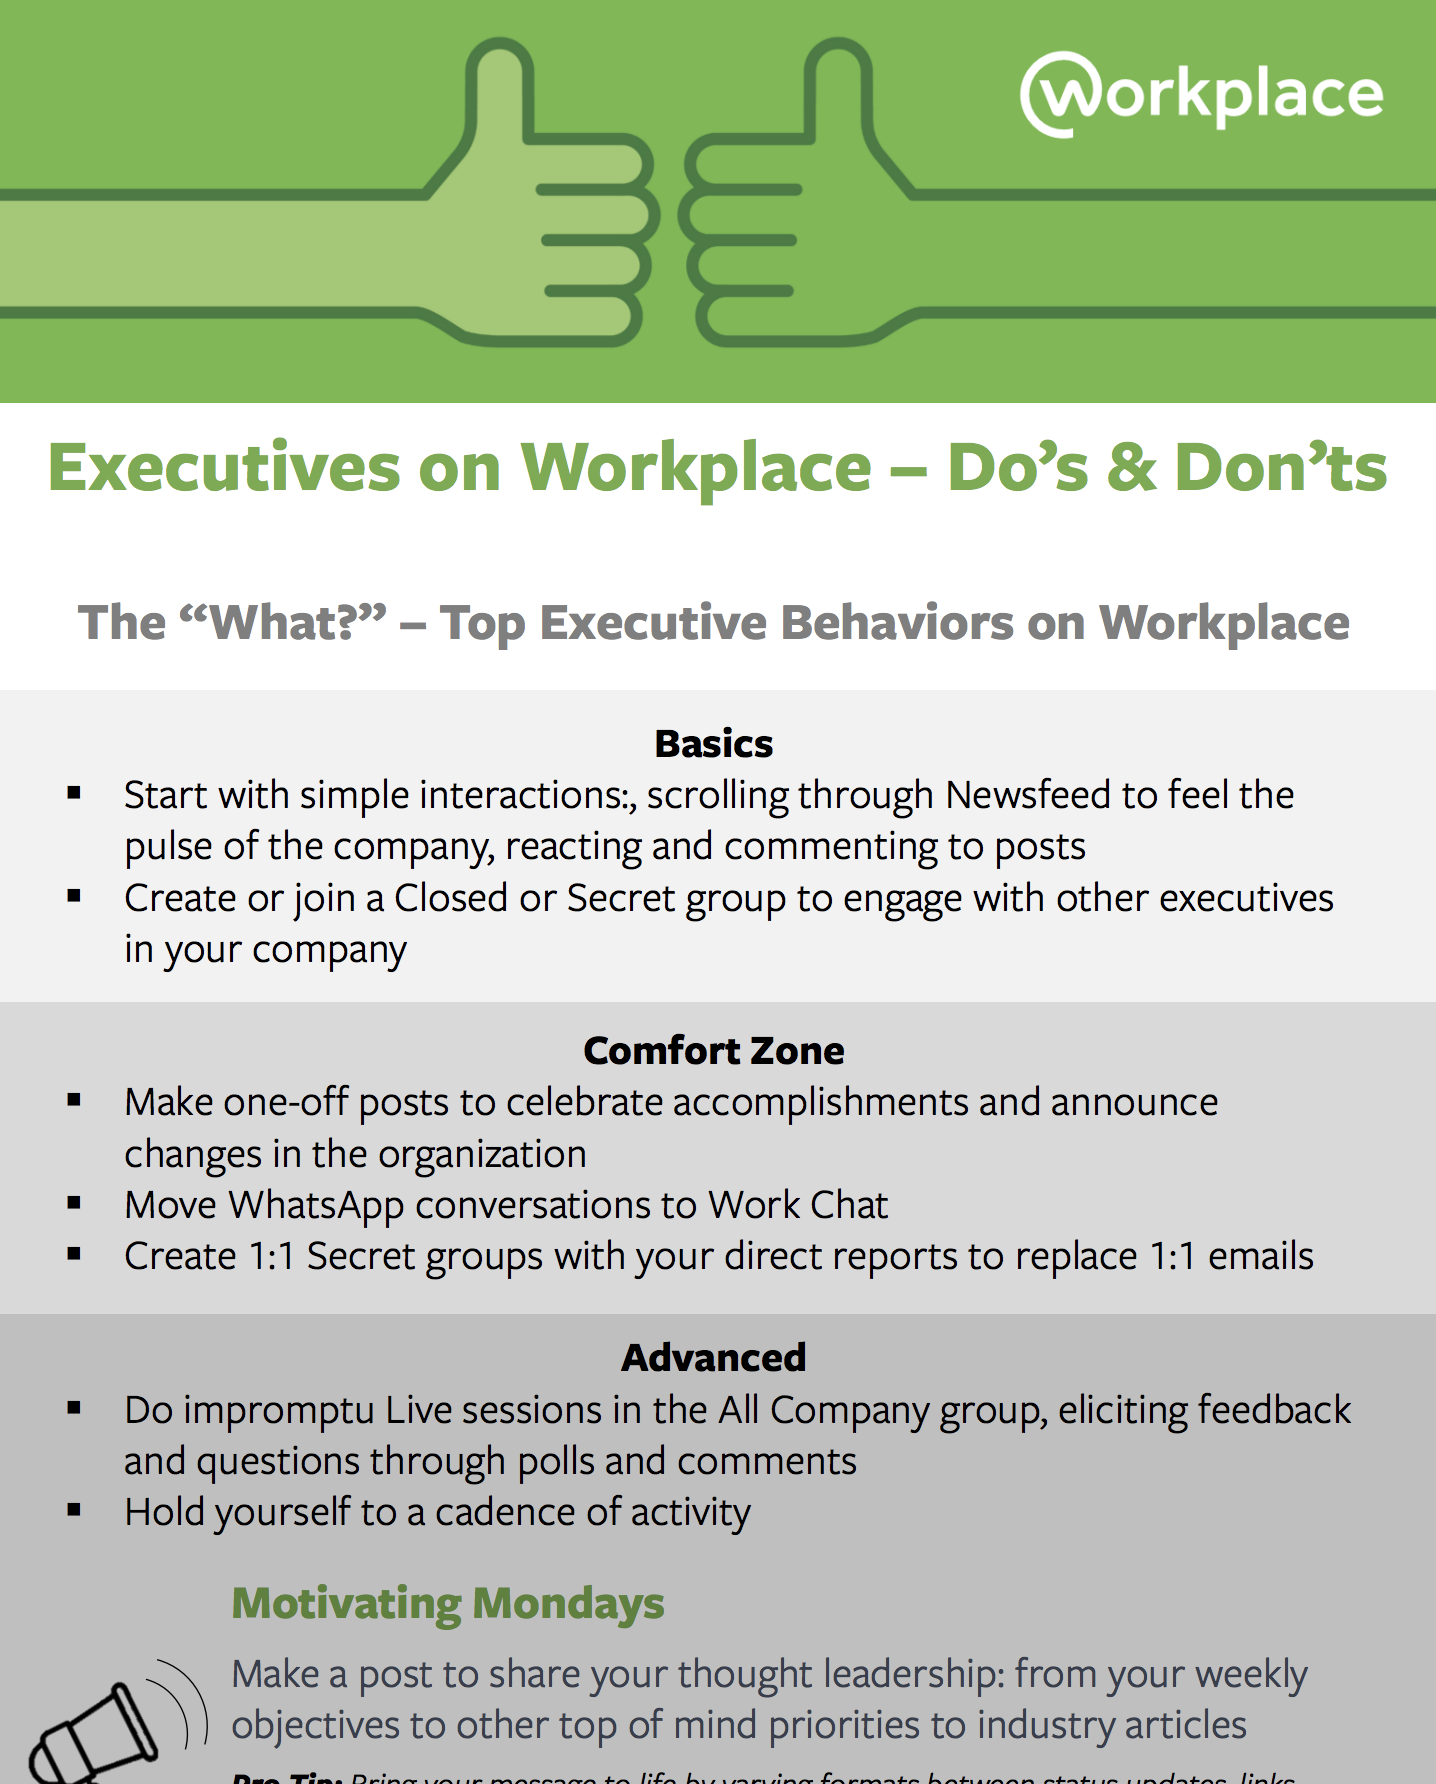 Workplace Do's and Dont's whitepaper.png